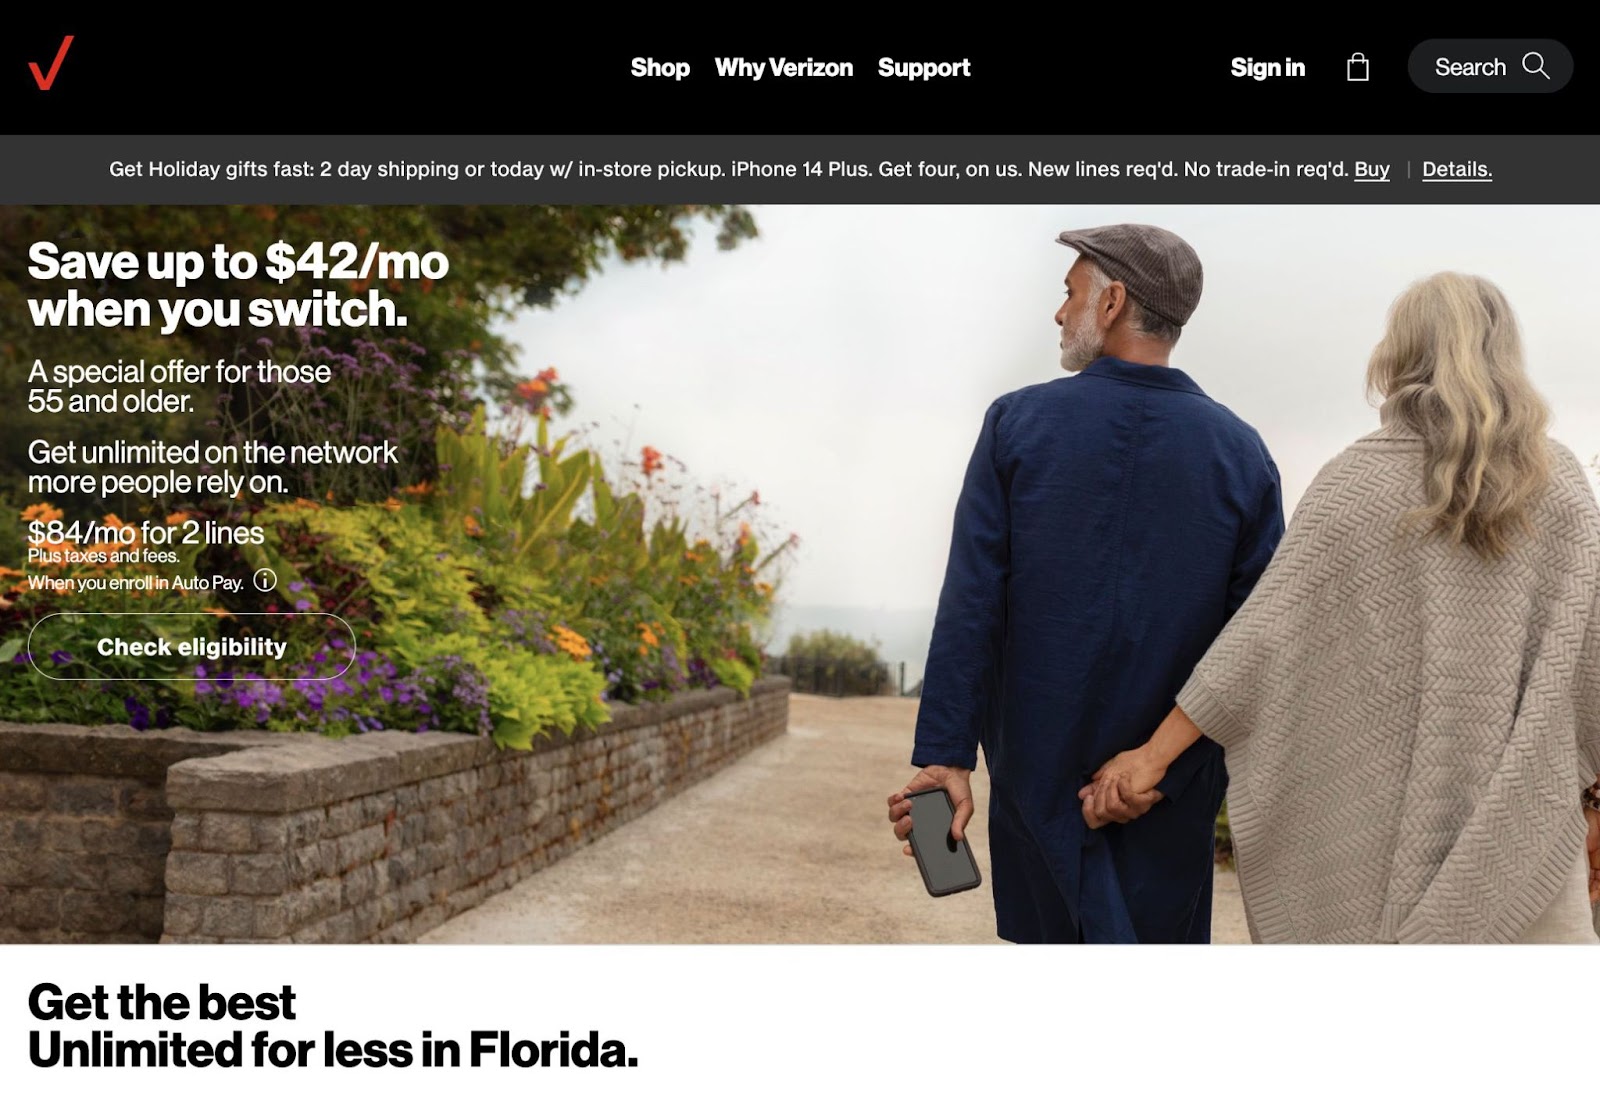 Verizon's landing page featuring an older couple